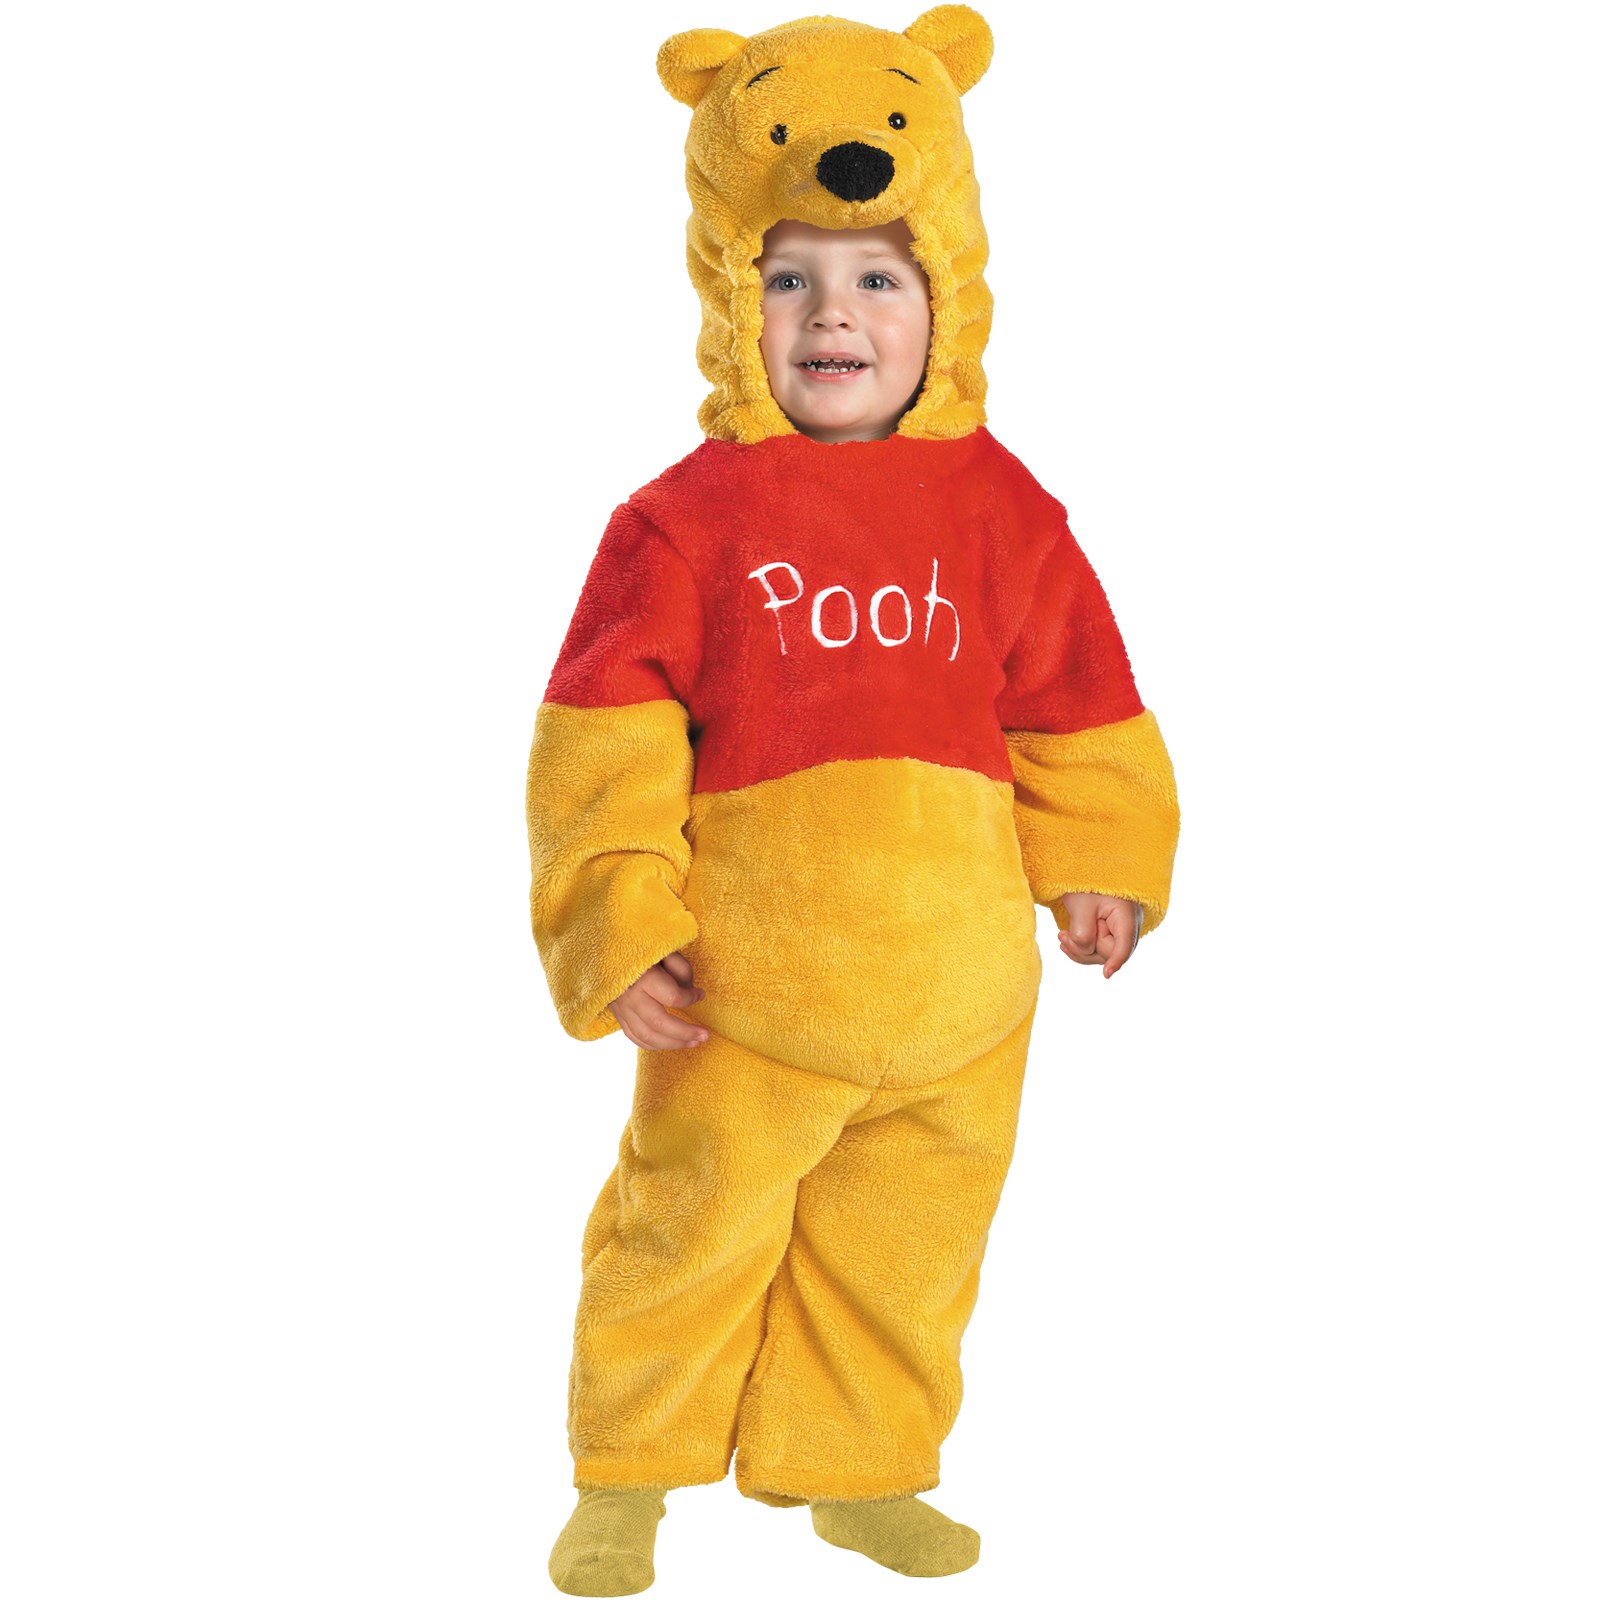 Winnie the Pooh Infant/Toddler Costume